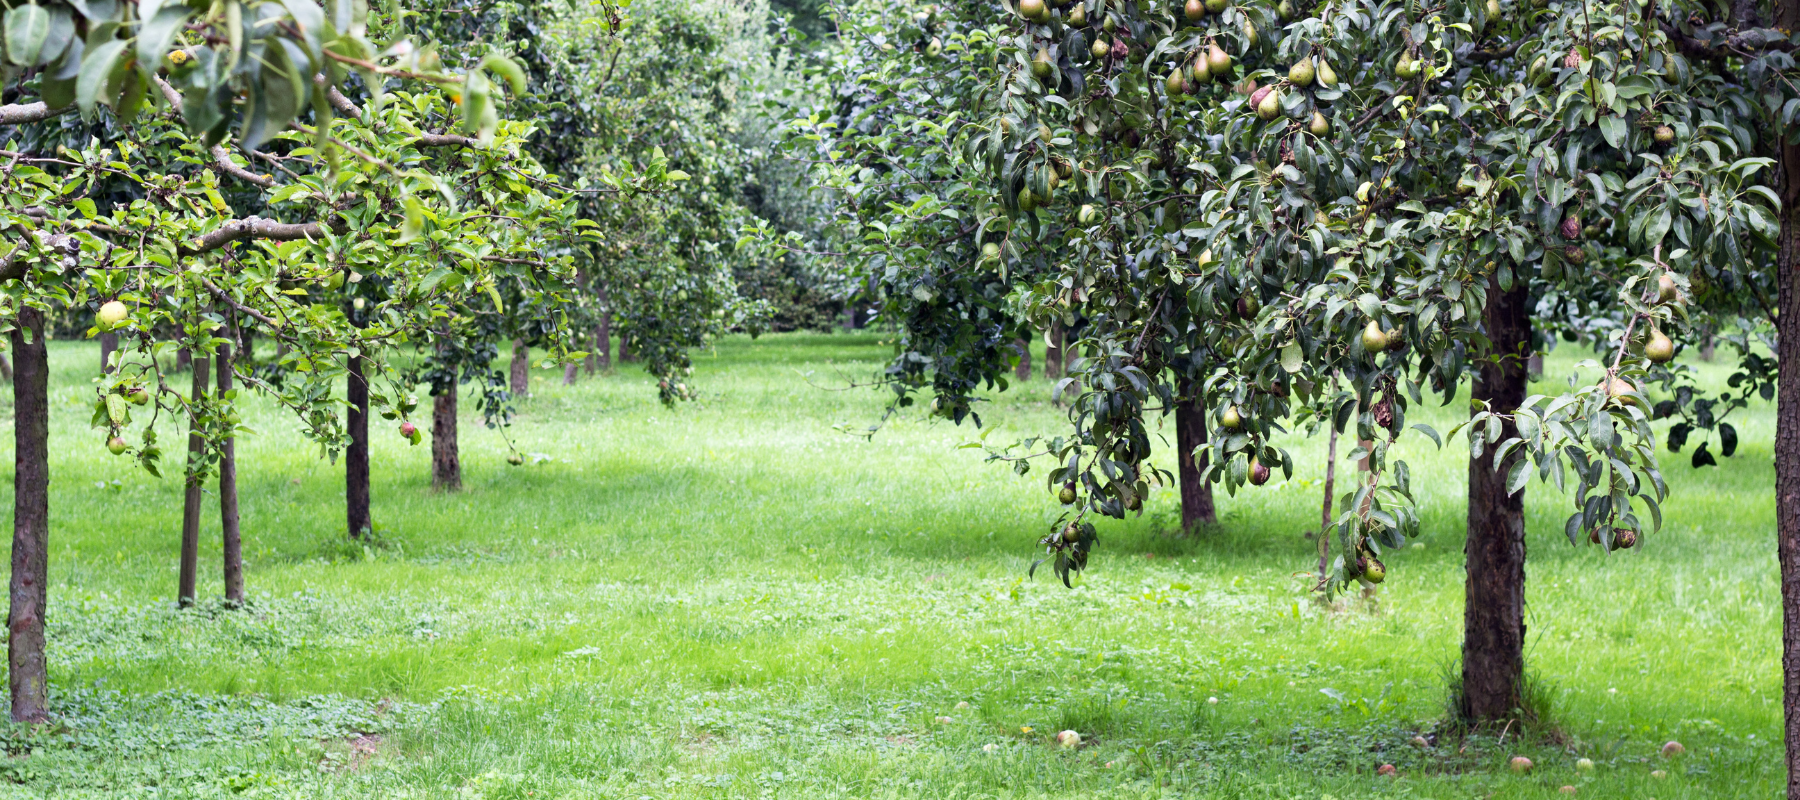 Maximising yield by summer pruning fruit trees